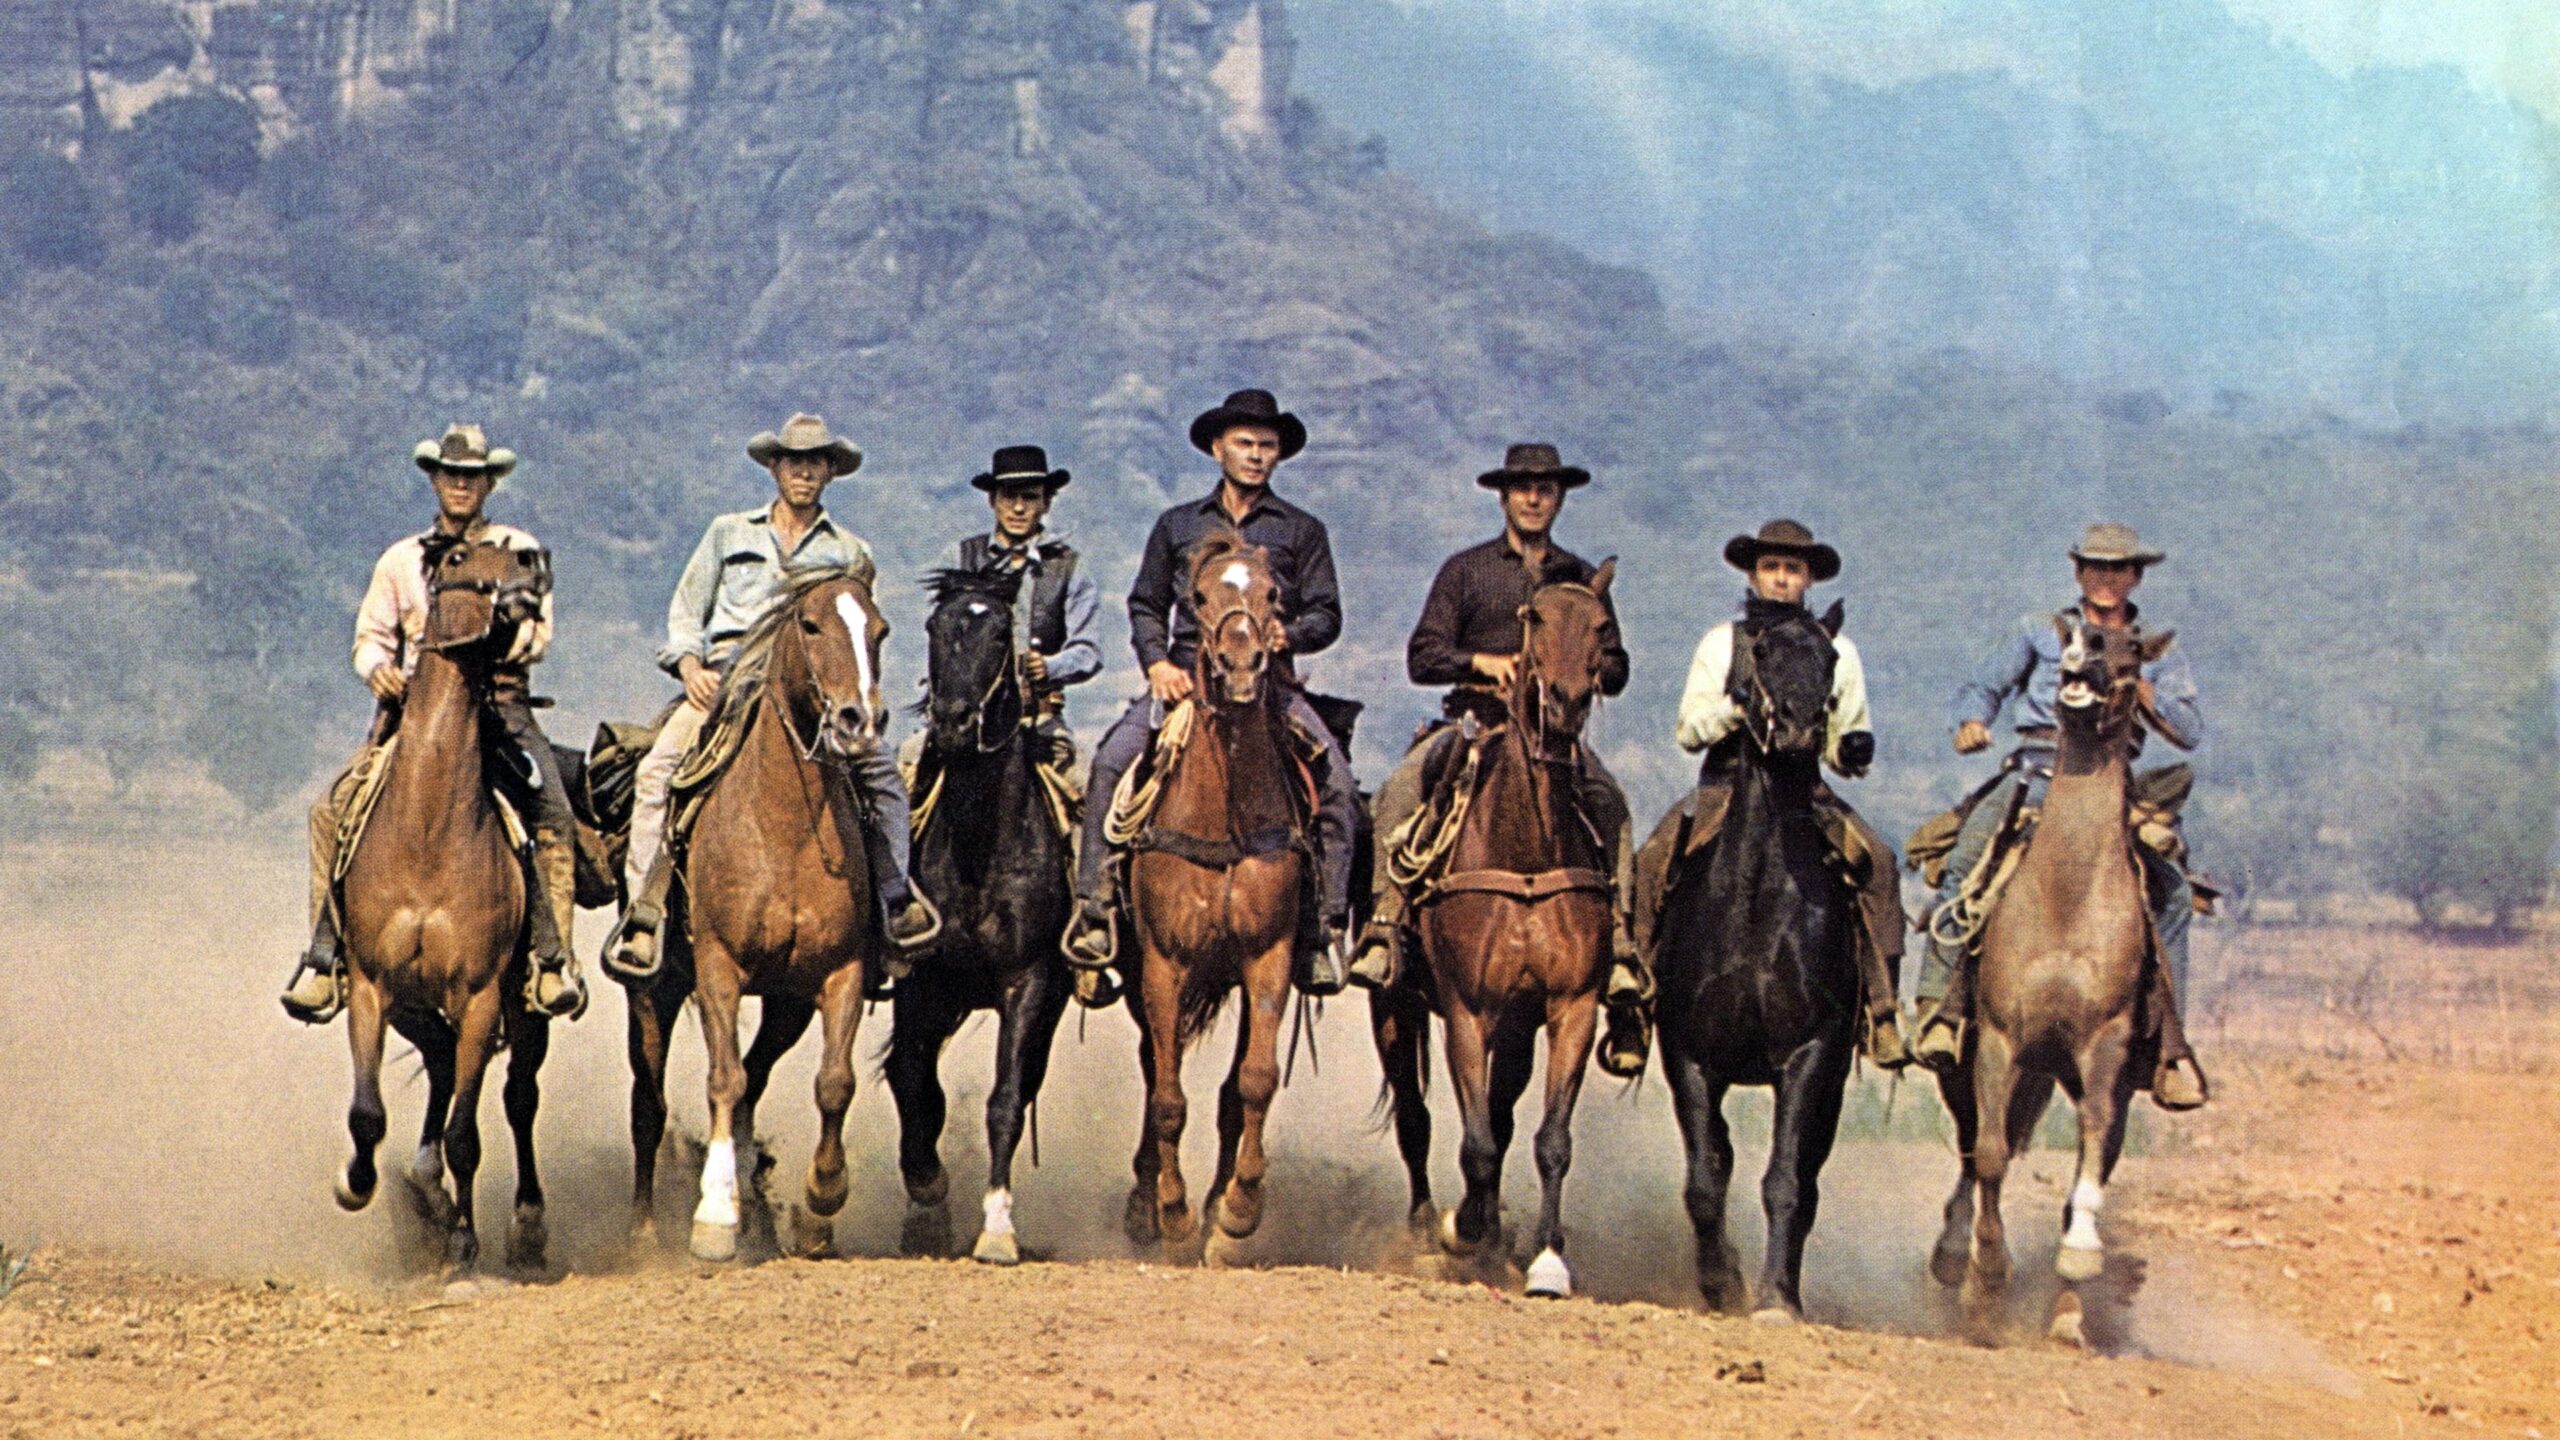 Will The ‘Vibecession’ Ever Catch Up With The Magnificent 7?